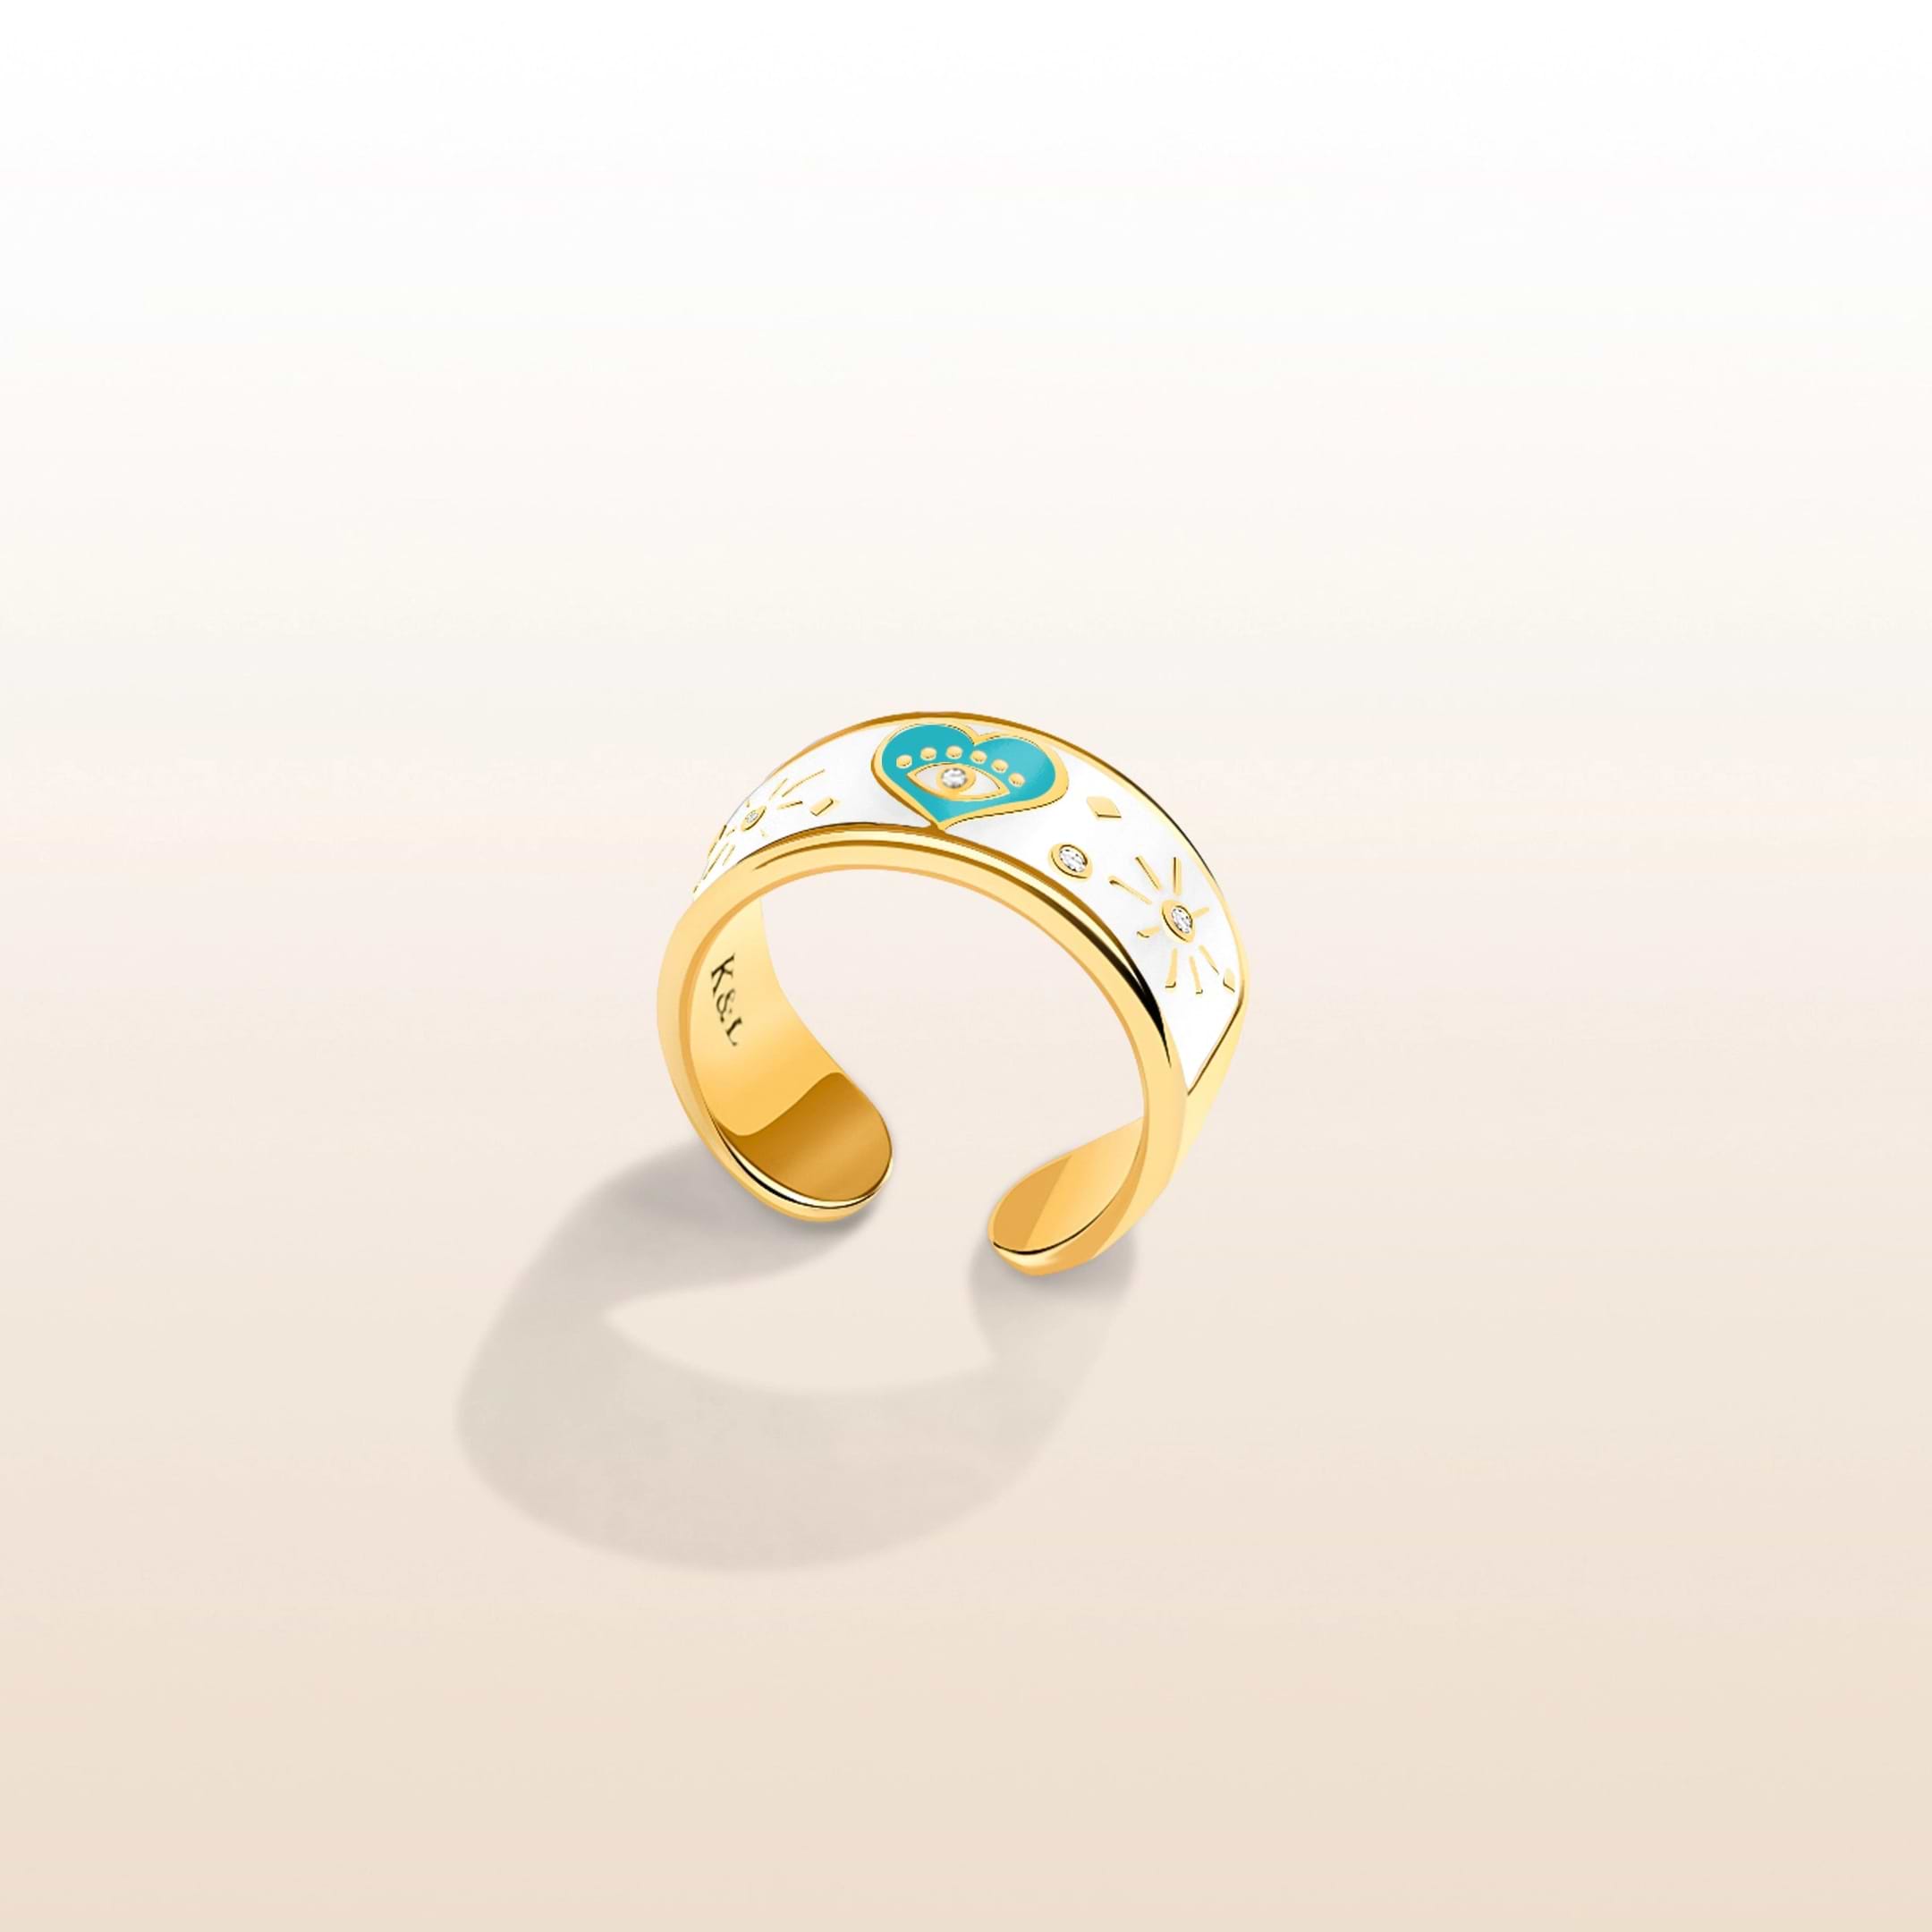 Picture of Boundless Love - Diamond & Blue Topaz Ring